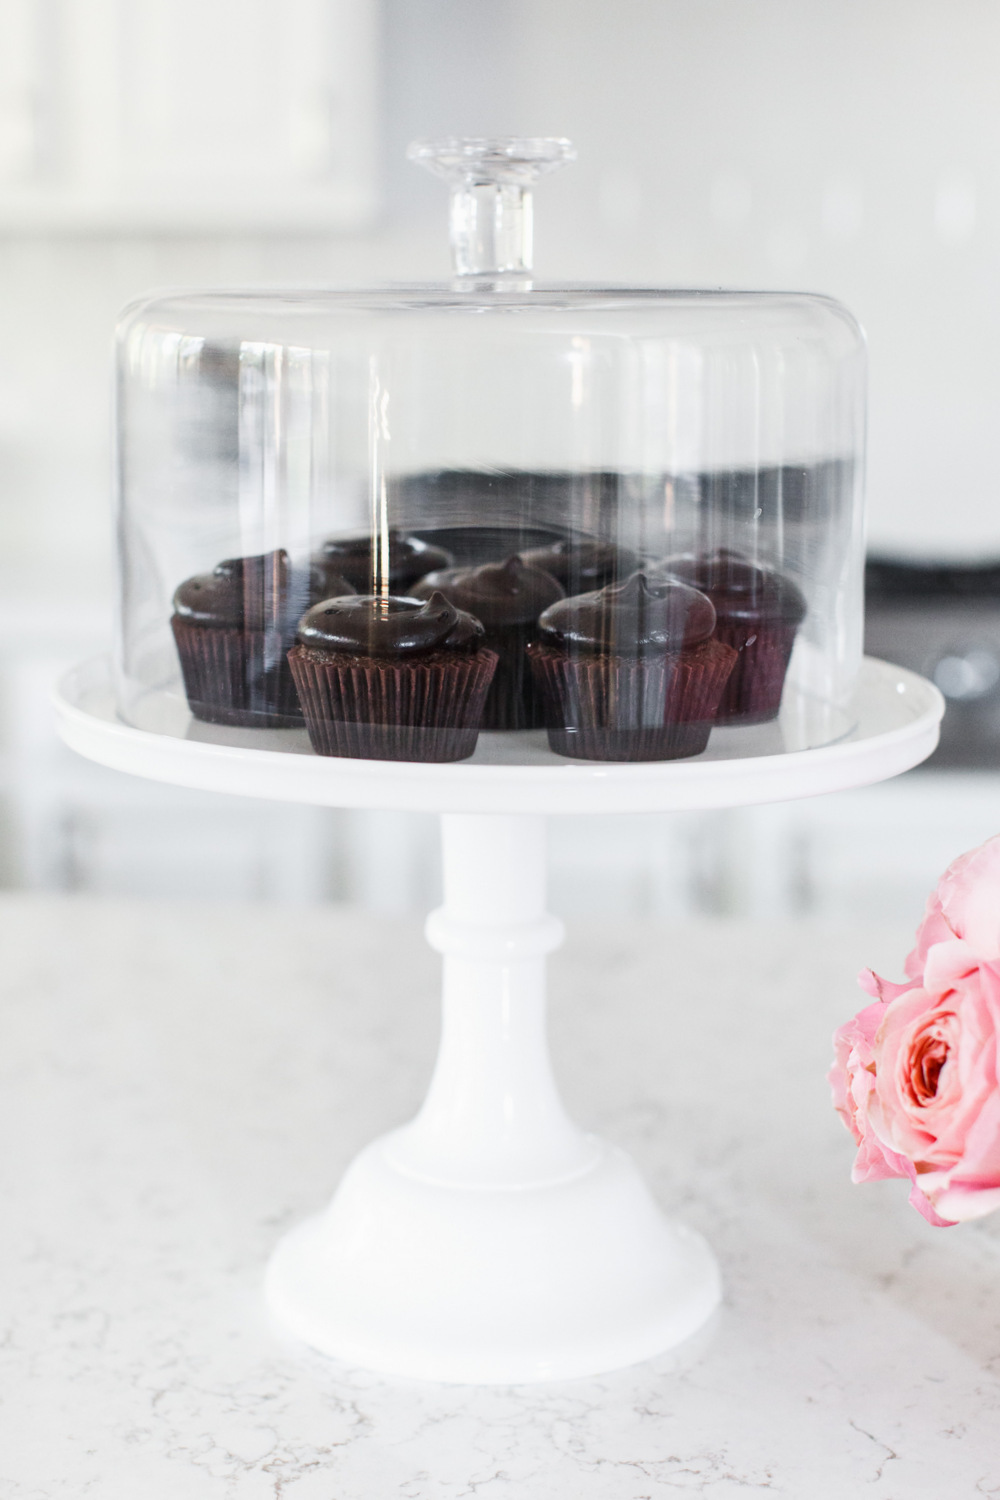 Chocolate Cupcakes on Cake Stand with Glass Dome